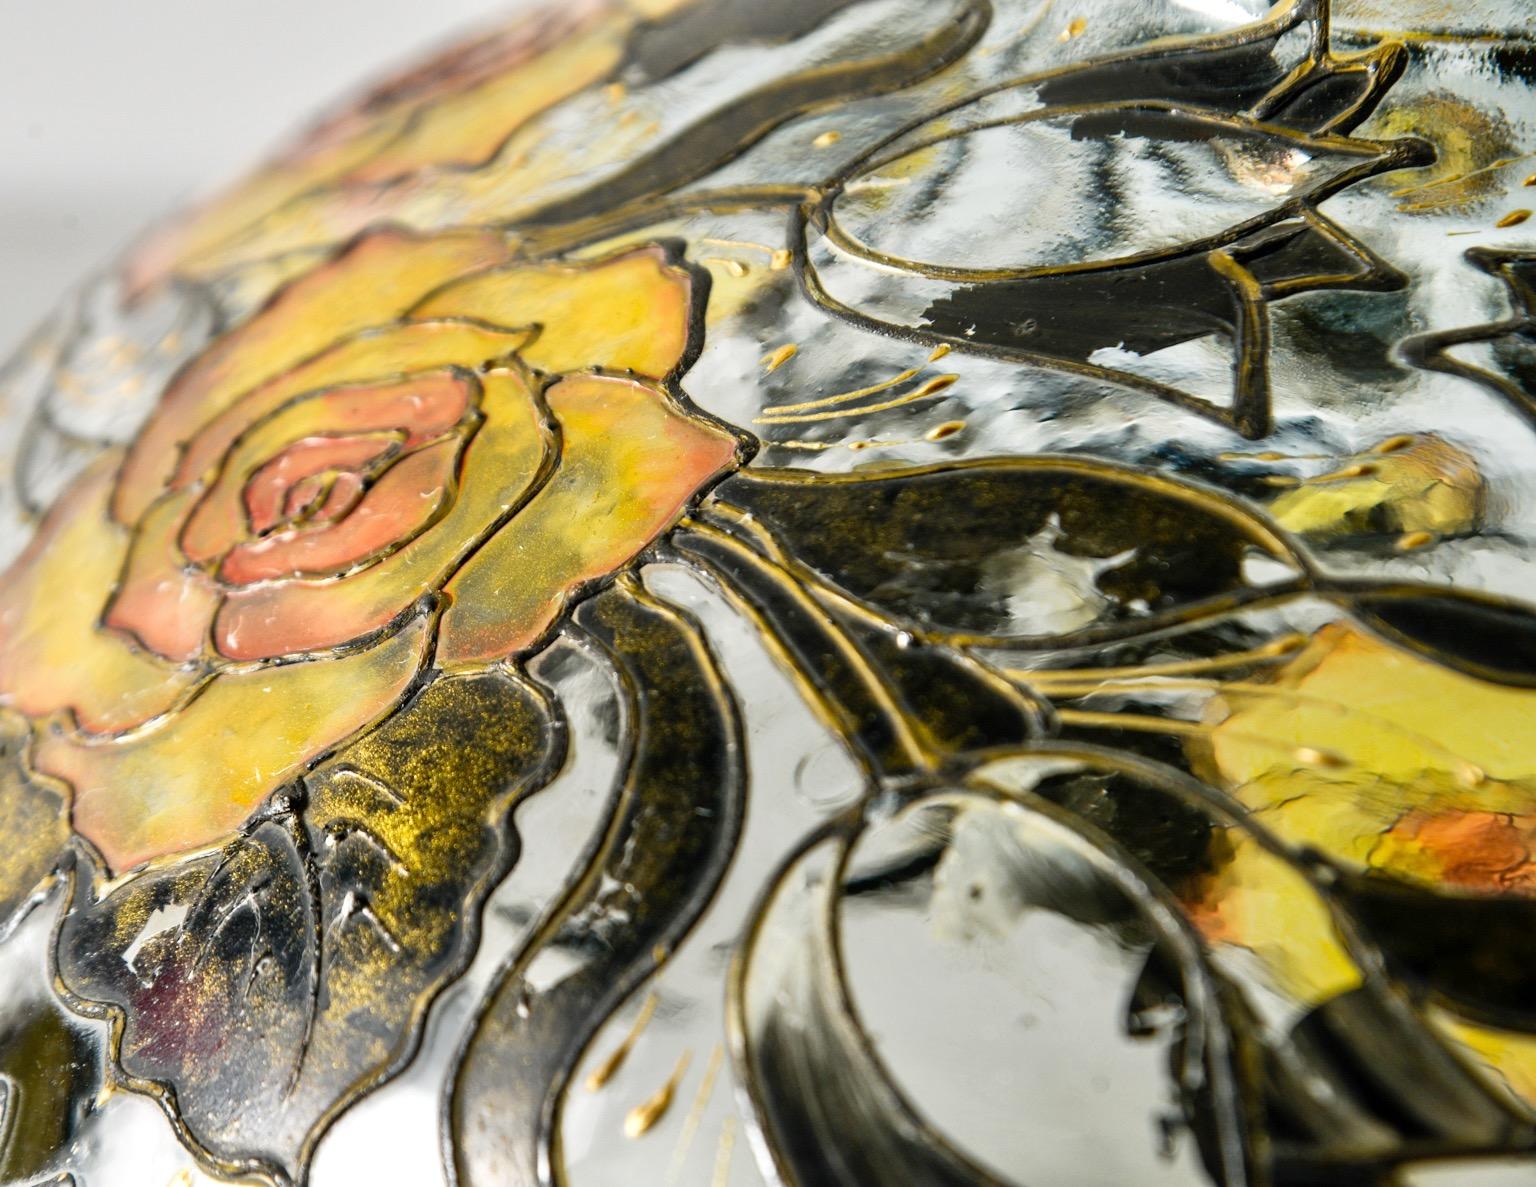 Extra large clear glass vase standing over 12” high and 15” in diameter with an intricately hand painted decoration of yellow roses and leaves, circa 1970s. Paint has a raised texture and stained-glass look in that it’s not opaque. The large scale